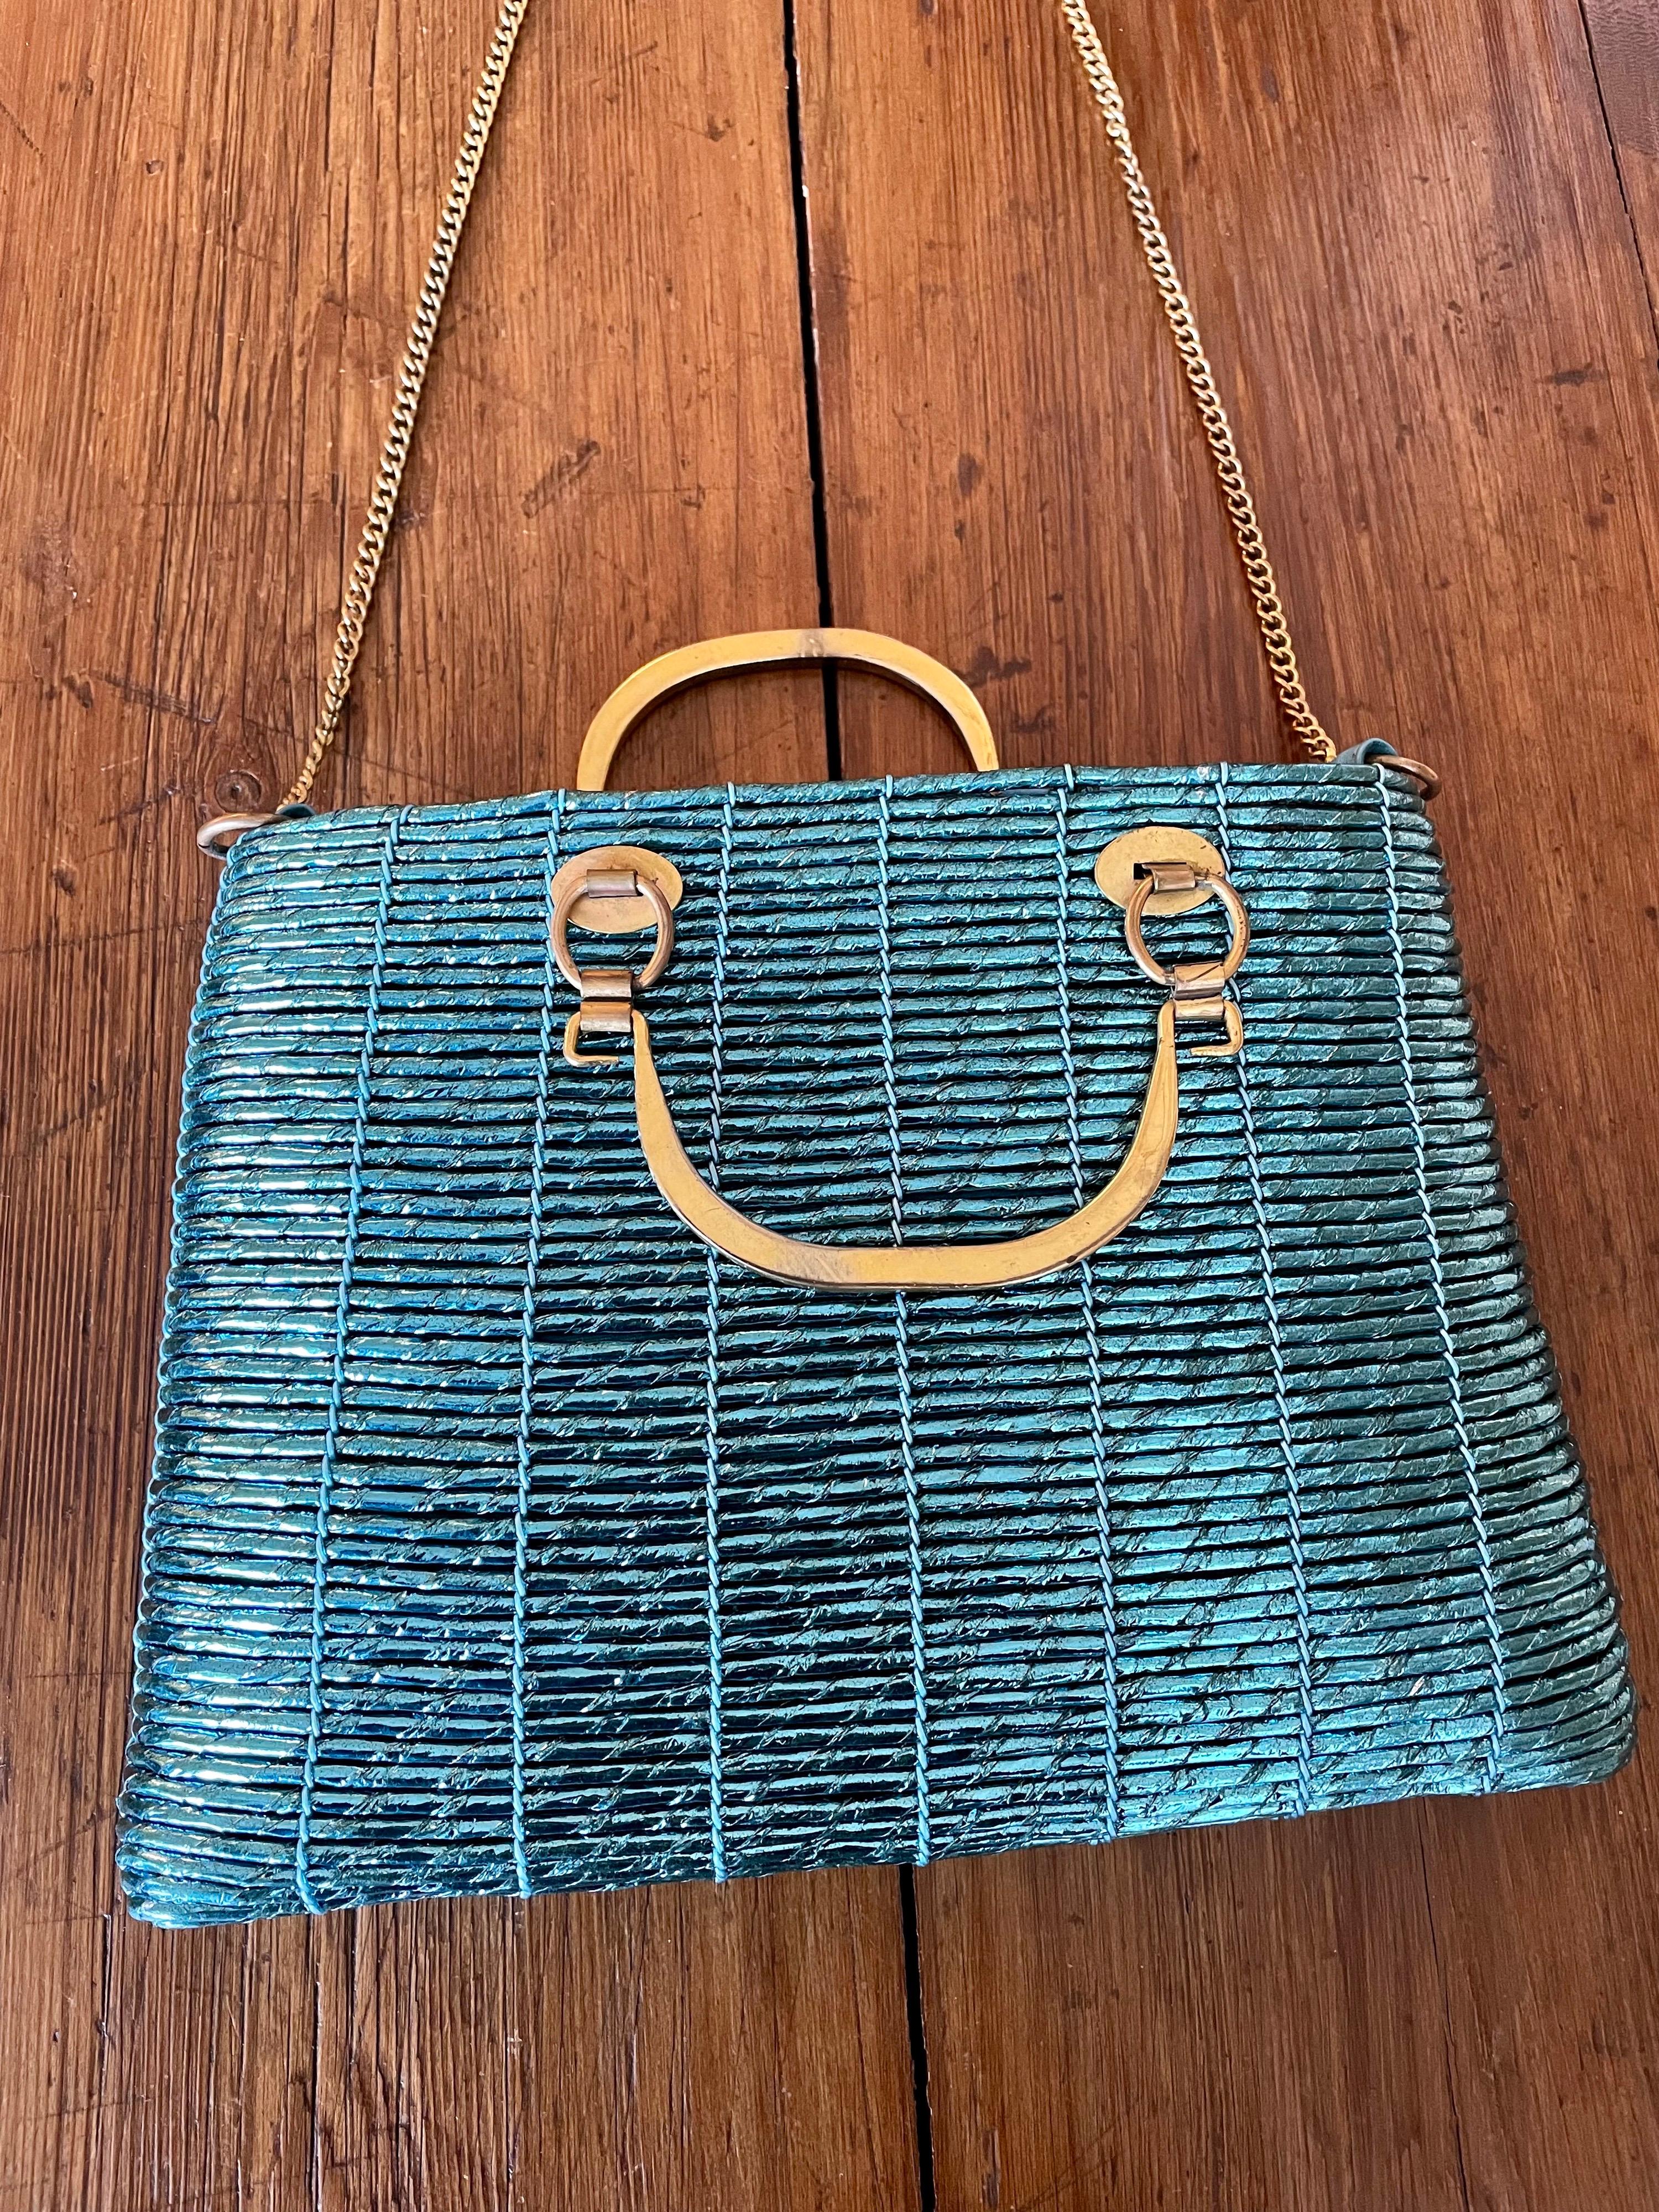 Roberta di Camerino bag. 
Unique. About 50s.
Leather bag covered by turquoise plastic.
Featuring brass handler and golden shoulder strap. It comes with the original dust bag.
Measurements:
Height 20 cm 
Width 28 cm
Depth 4 cm 
Handler 6 cm
Shoulder